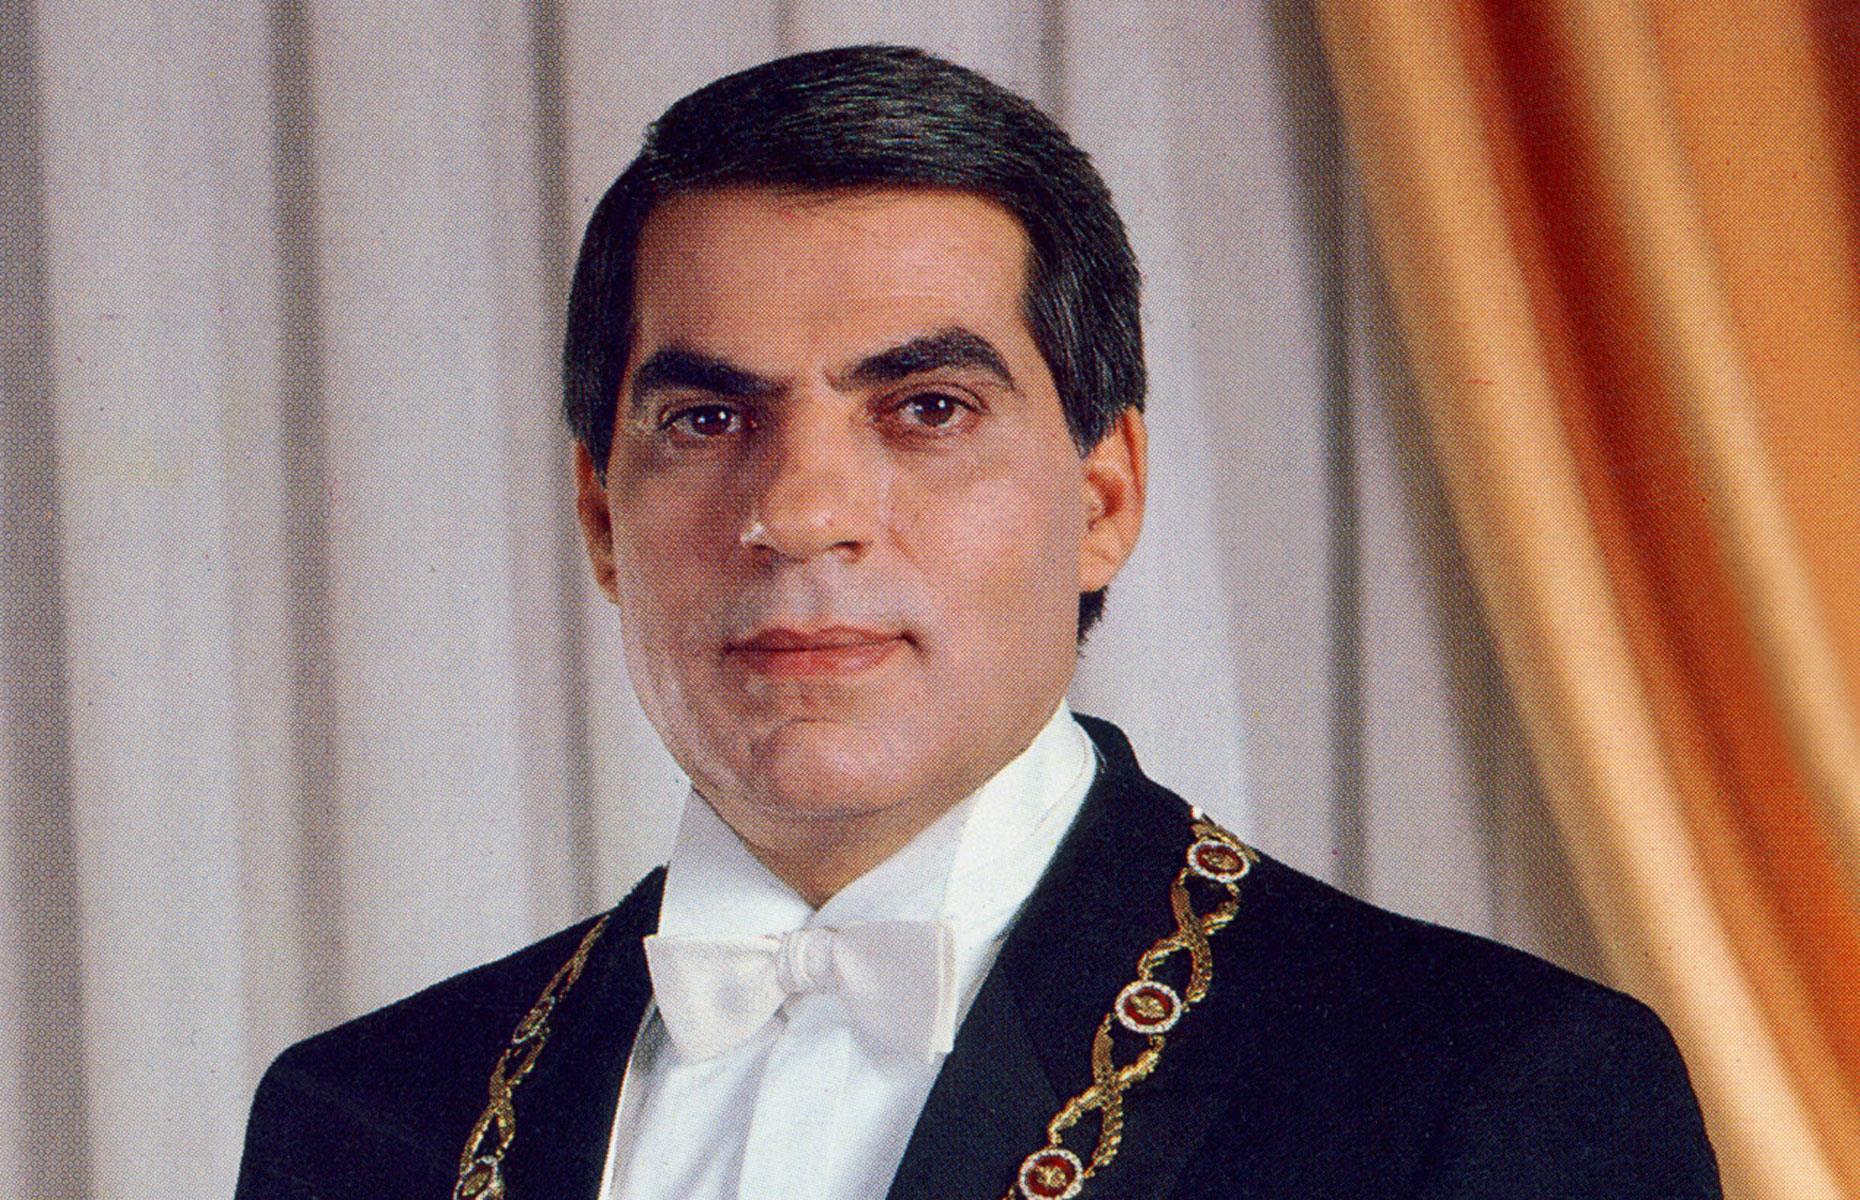 <p>Loathed by his people, ex-Tunisian leader Zine El Abidine Ben Ali is thought to have controlled between 30% to 40% of the nation's economy during his time in power. Together with his family, the late president held assets estimated to be worth around $10 billion in 2011, the year he was ousted.</p>